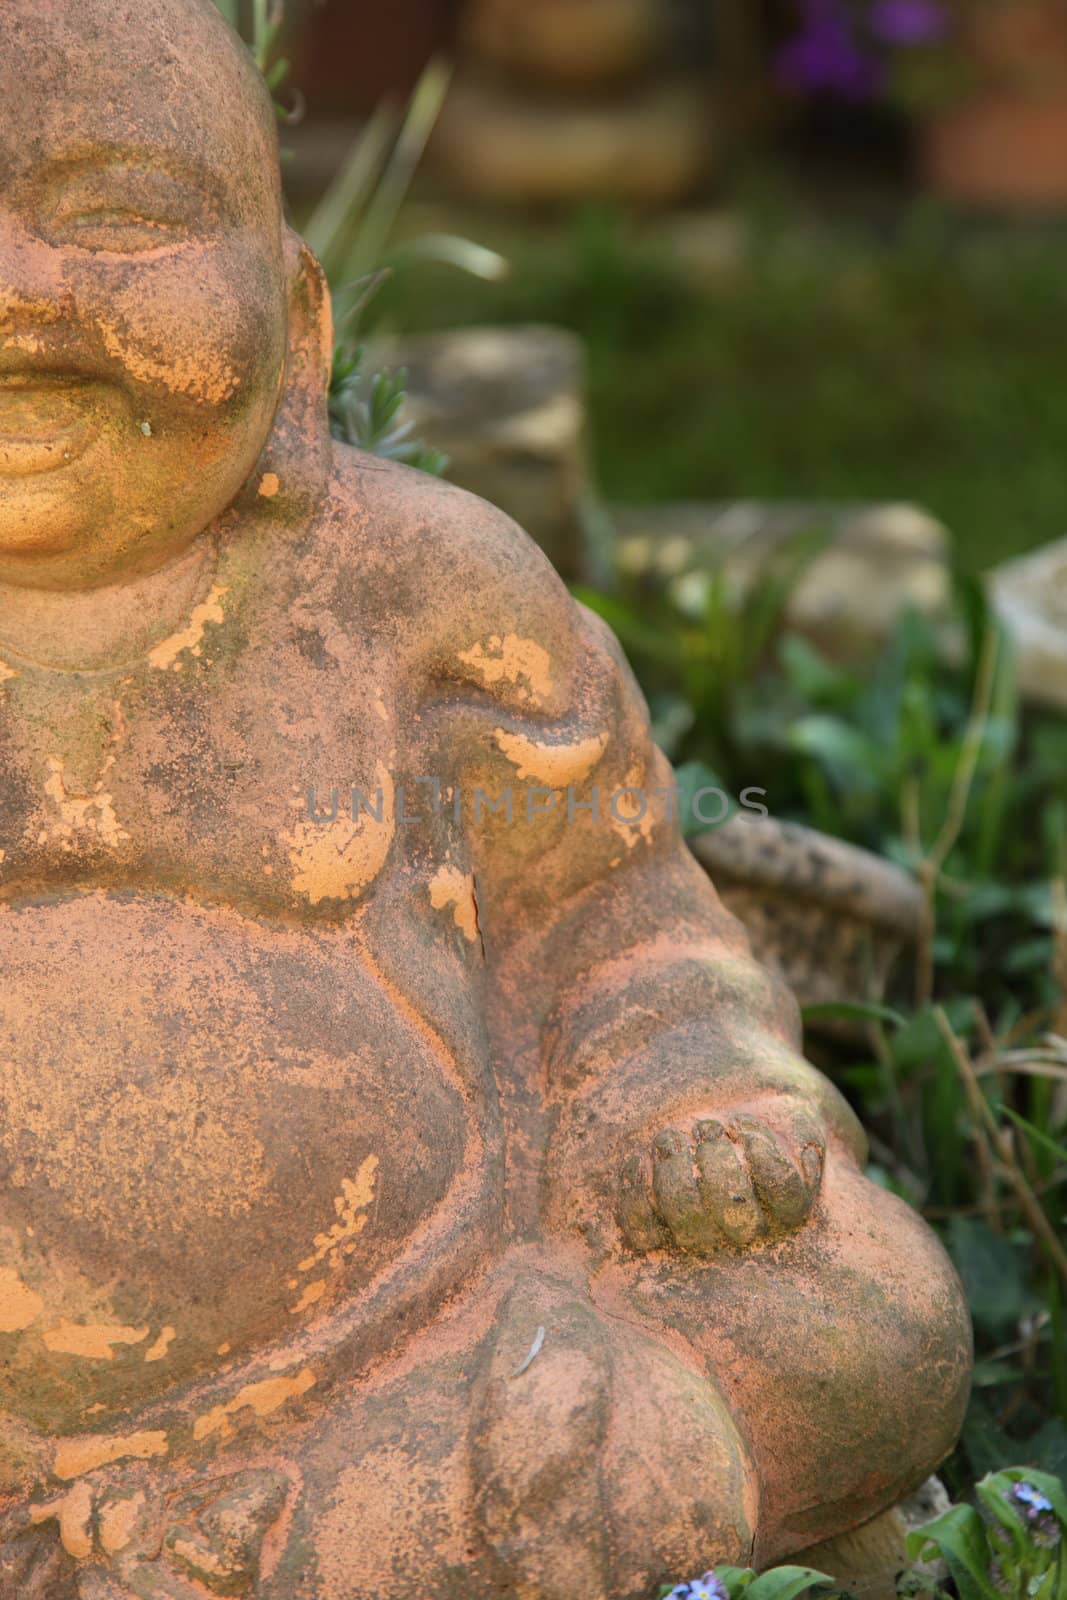 Partial half view of an old terracotta smiling Buddha figurine sitting outdoors amongst greenery